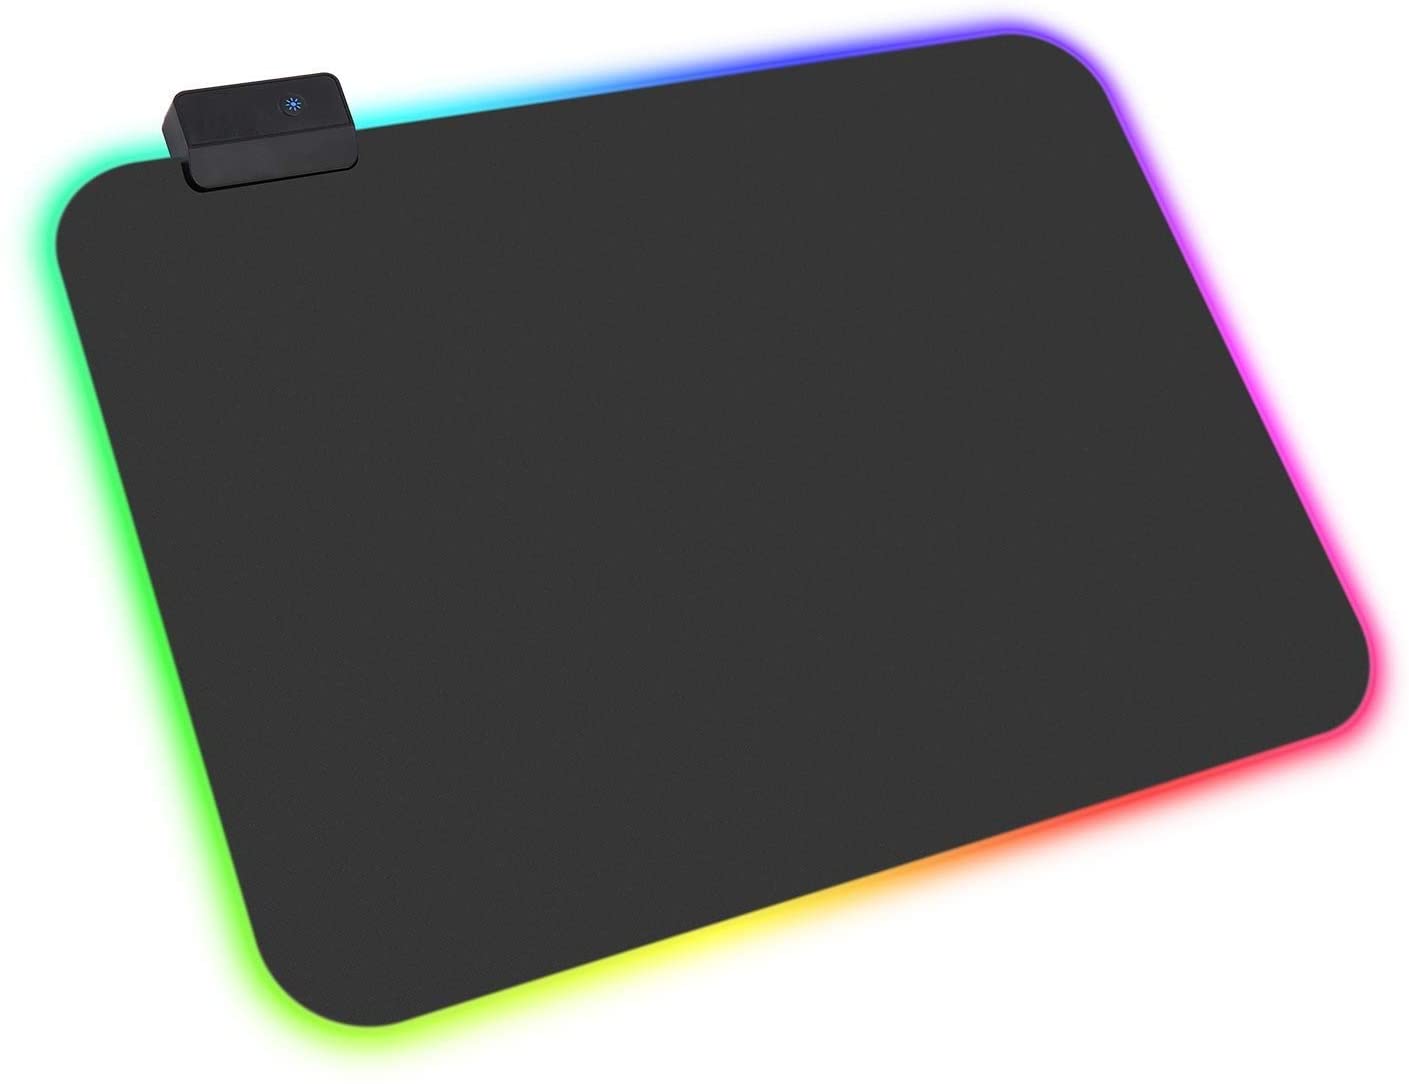 HF-IMMP04: Mouse Pad RGB, LED Lighting Effects Gaming Mice Pad Mat 14in*10in Non-Slip Rubber Base